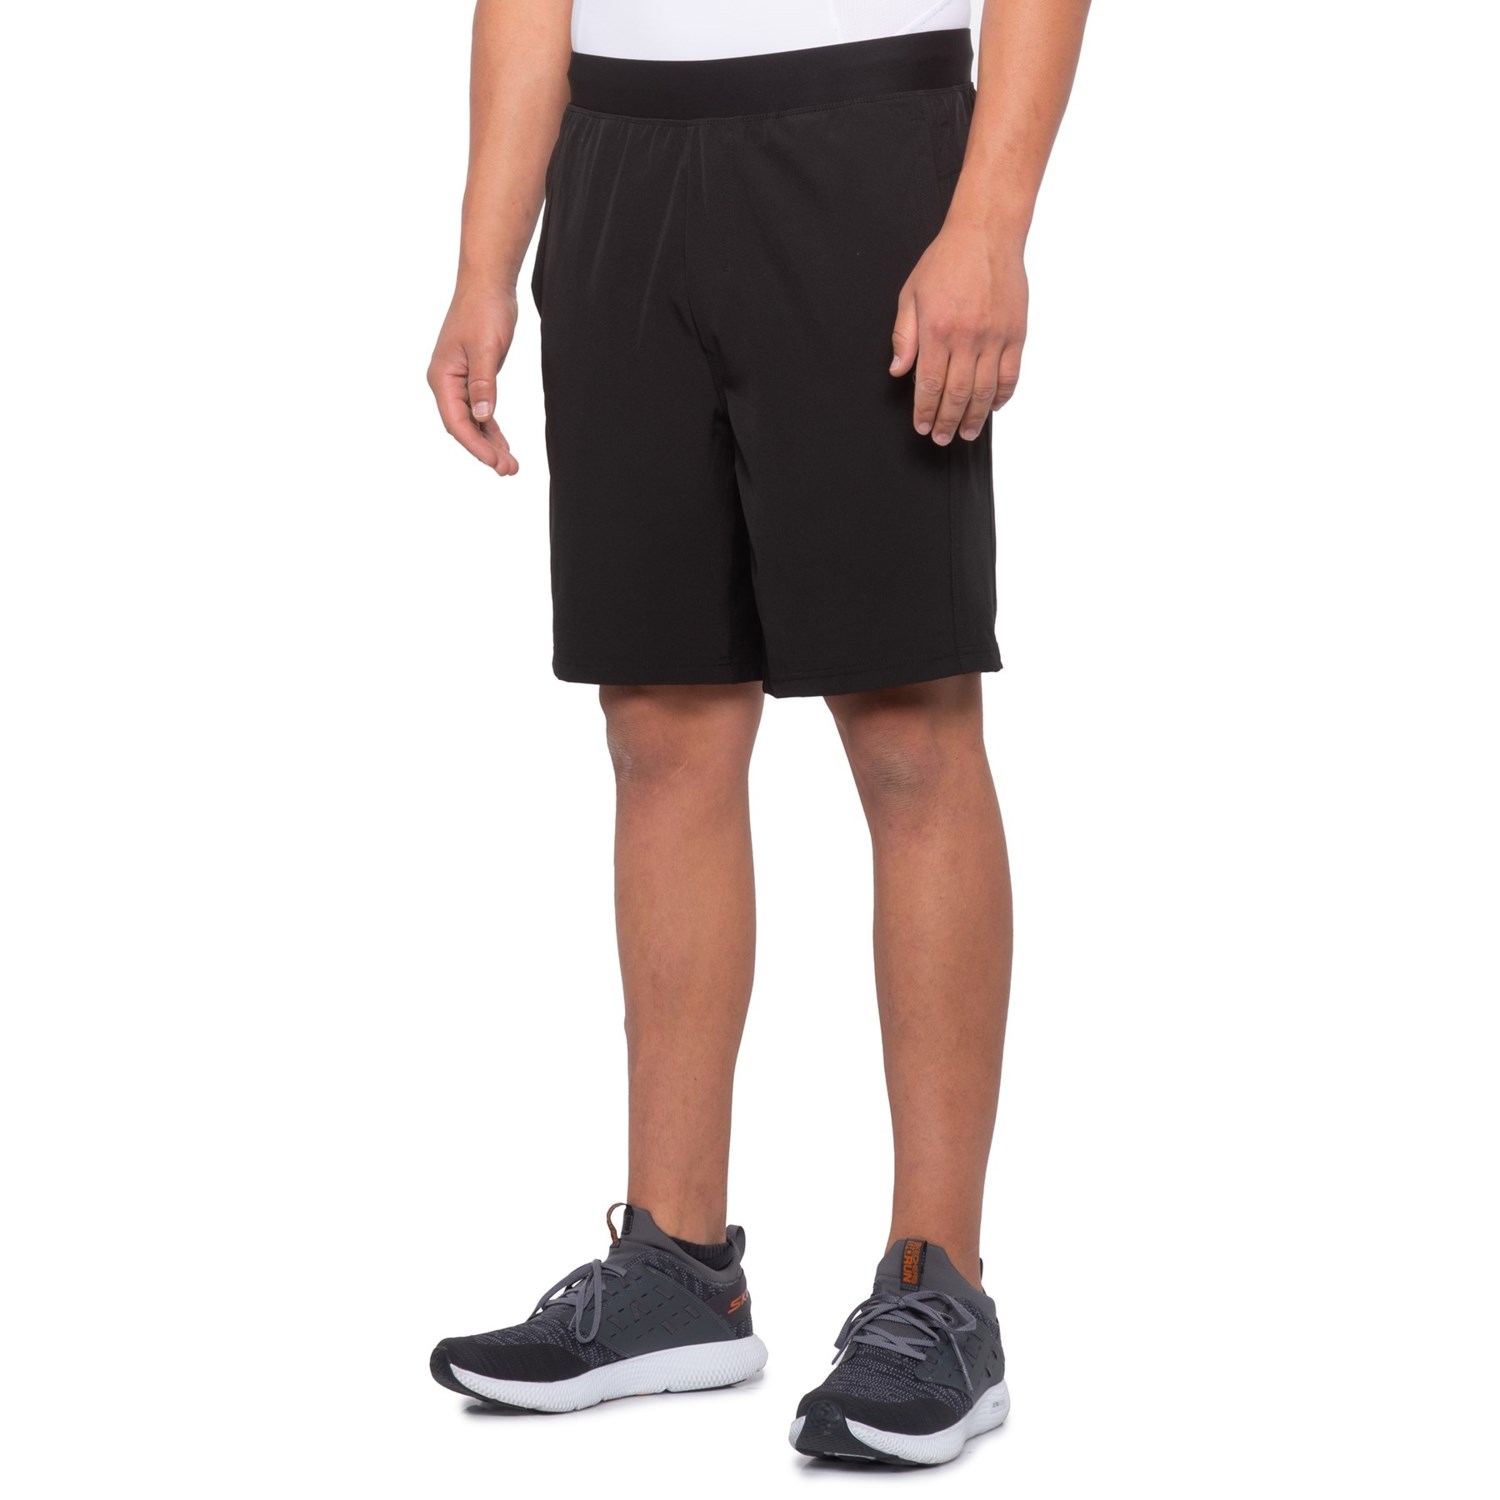 Gaiam Posture Woven Shorts (For Men) - Save 50%